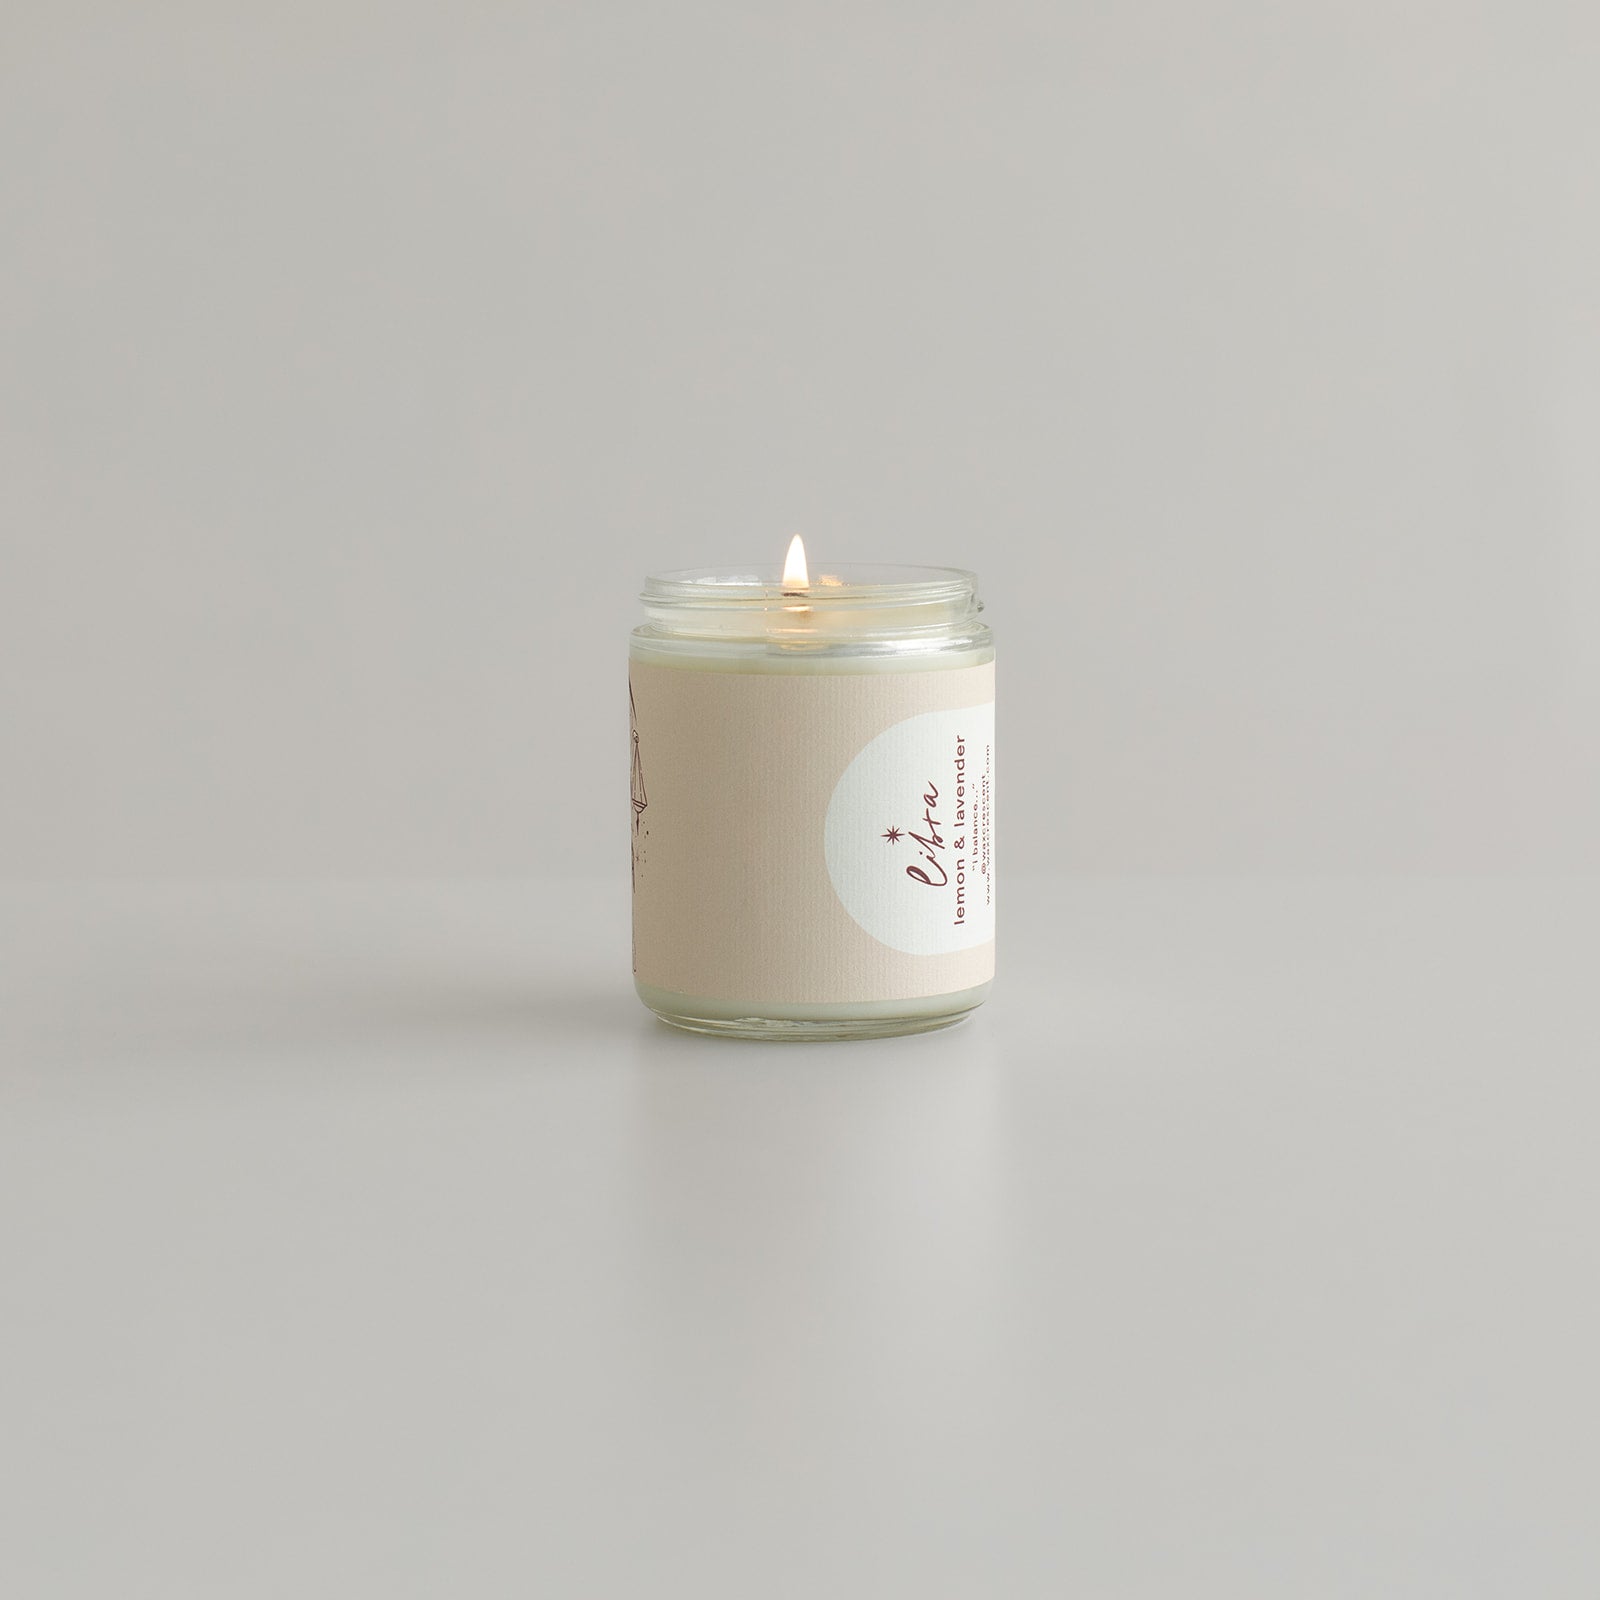 soy wax Libra zodiac candle for astrology sign in glass jar